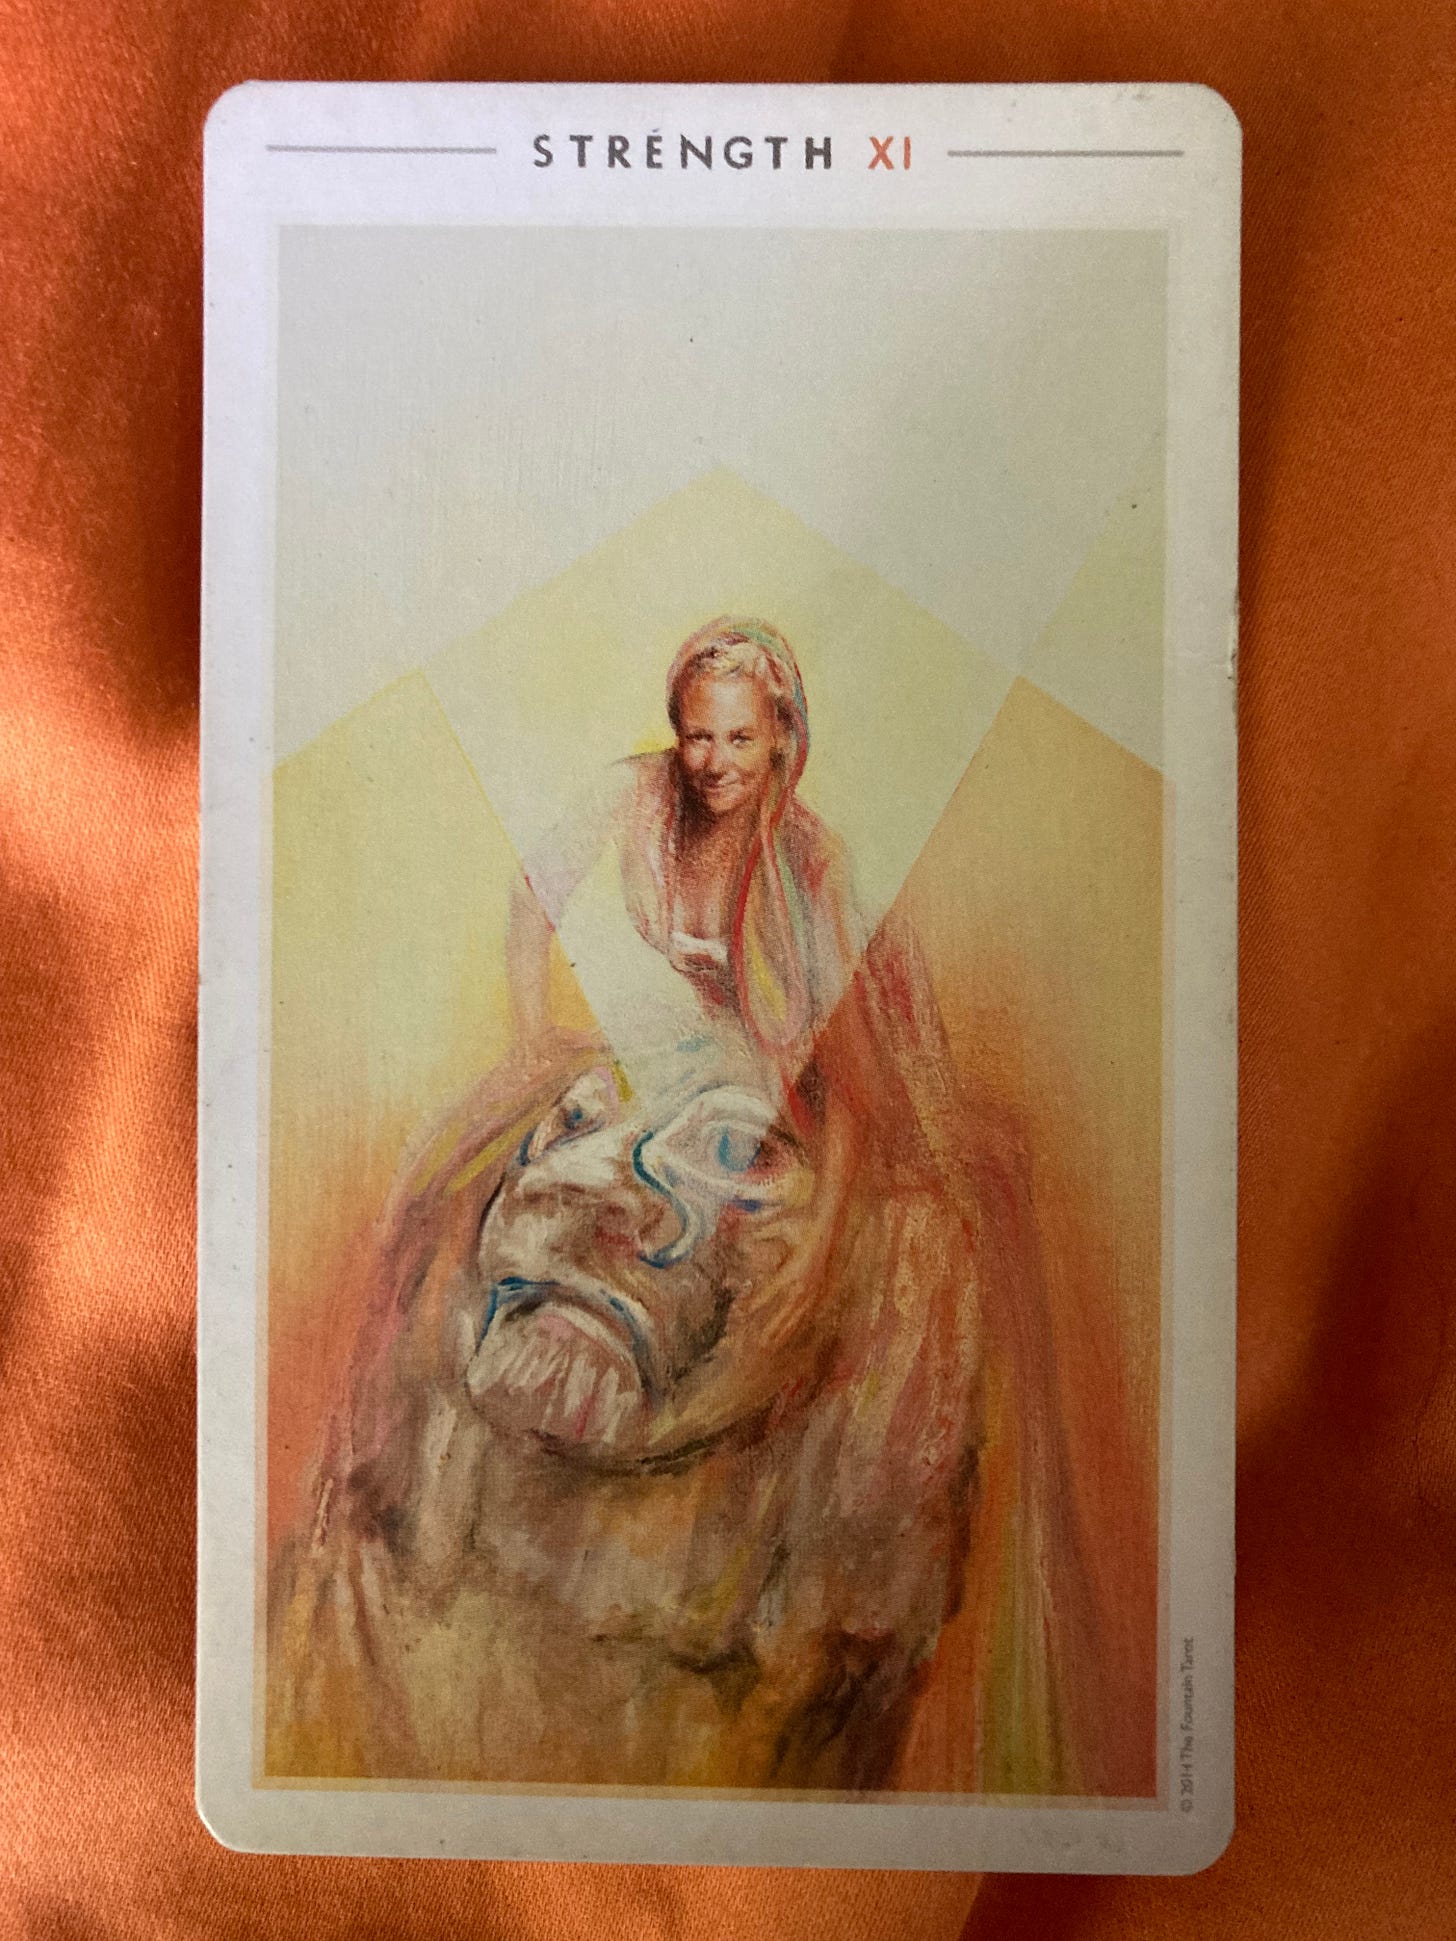 The Strength tarot card lays on an orange background. The card shows a drawing of a young woman sitting on the back of a lion